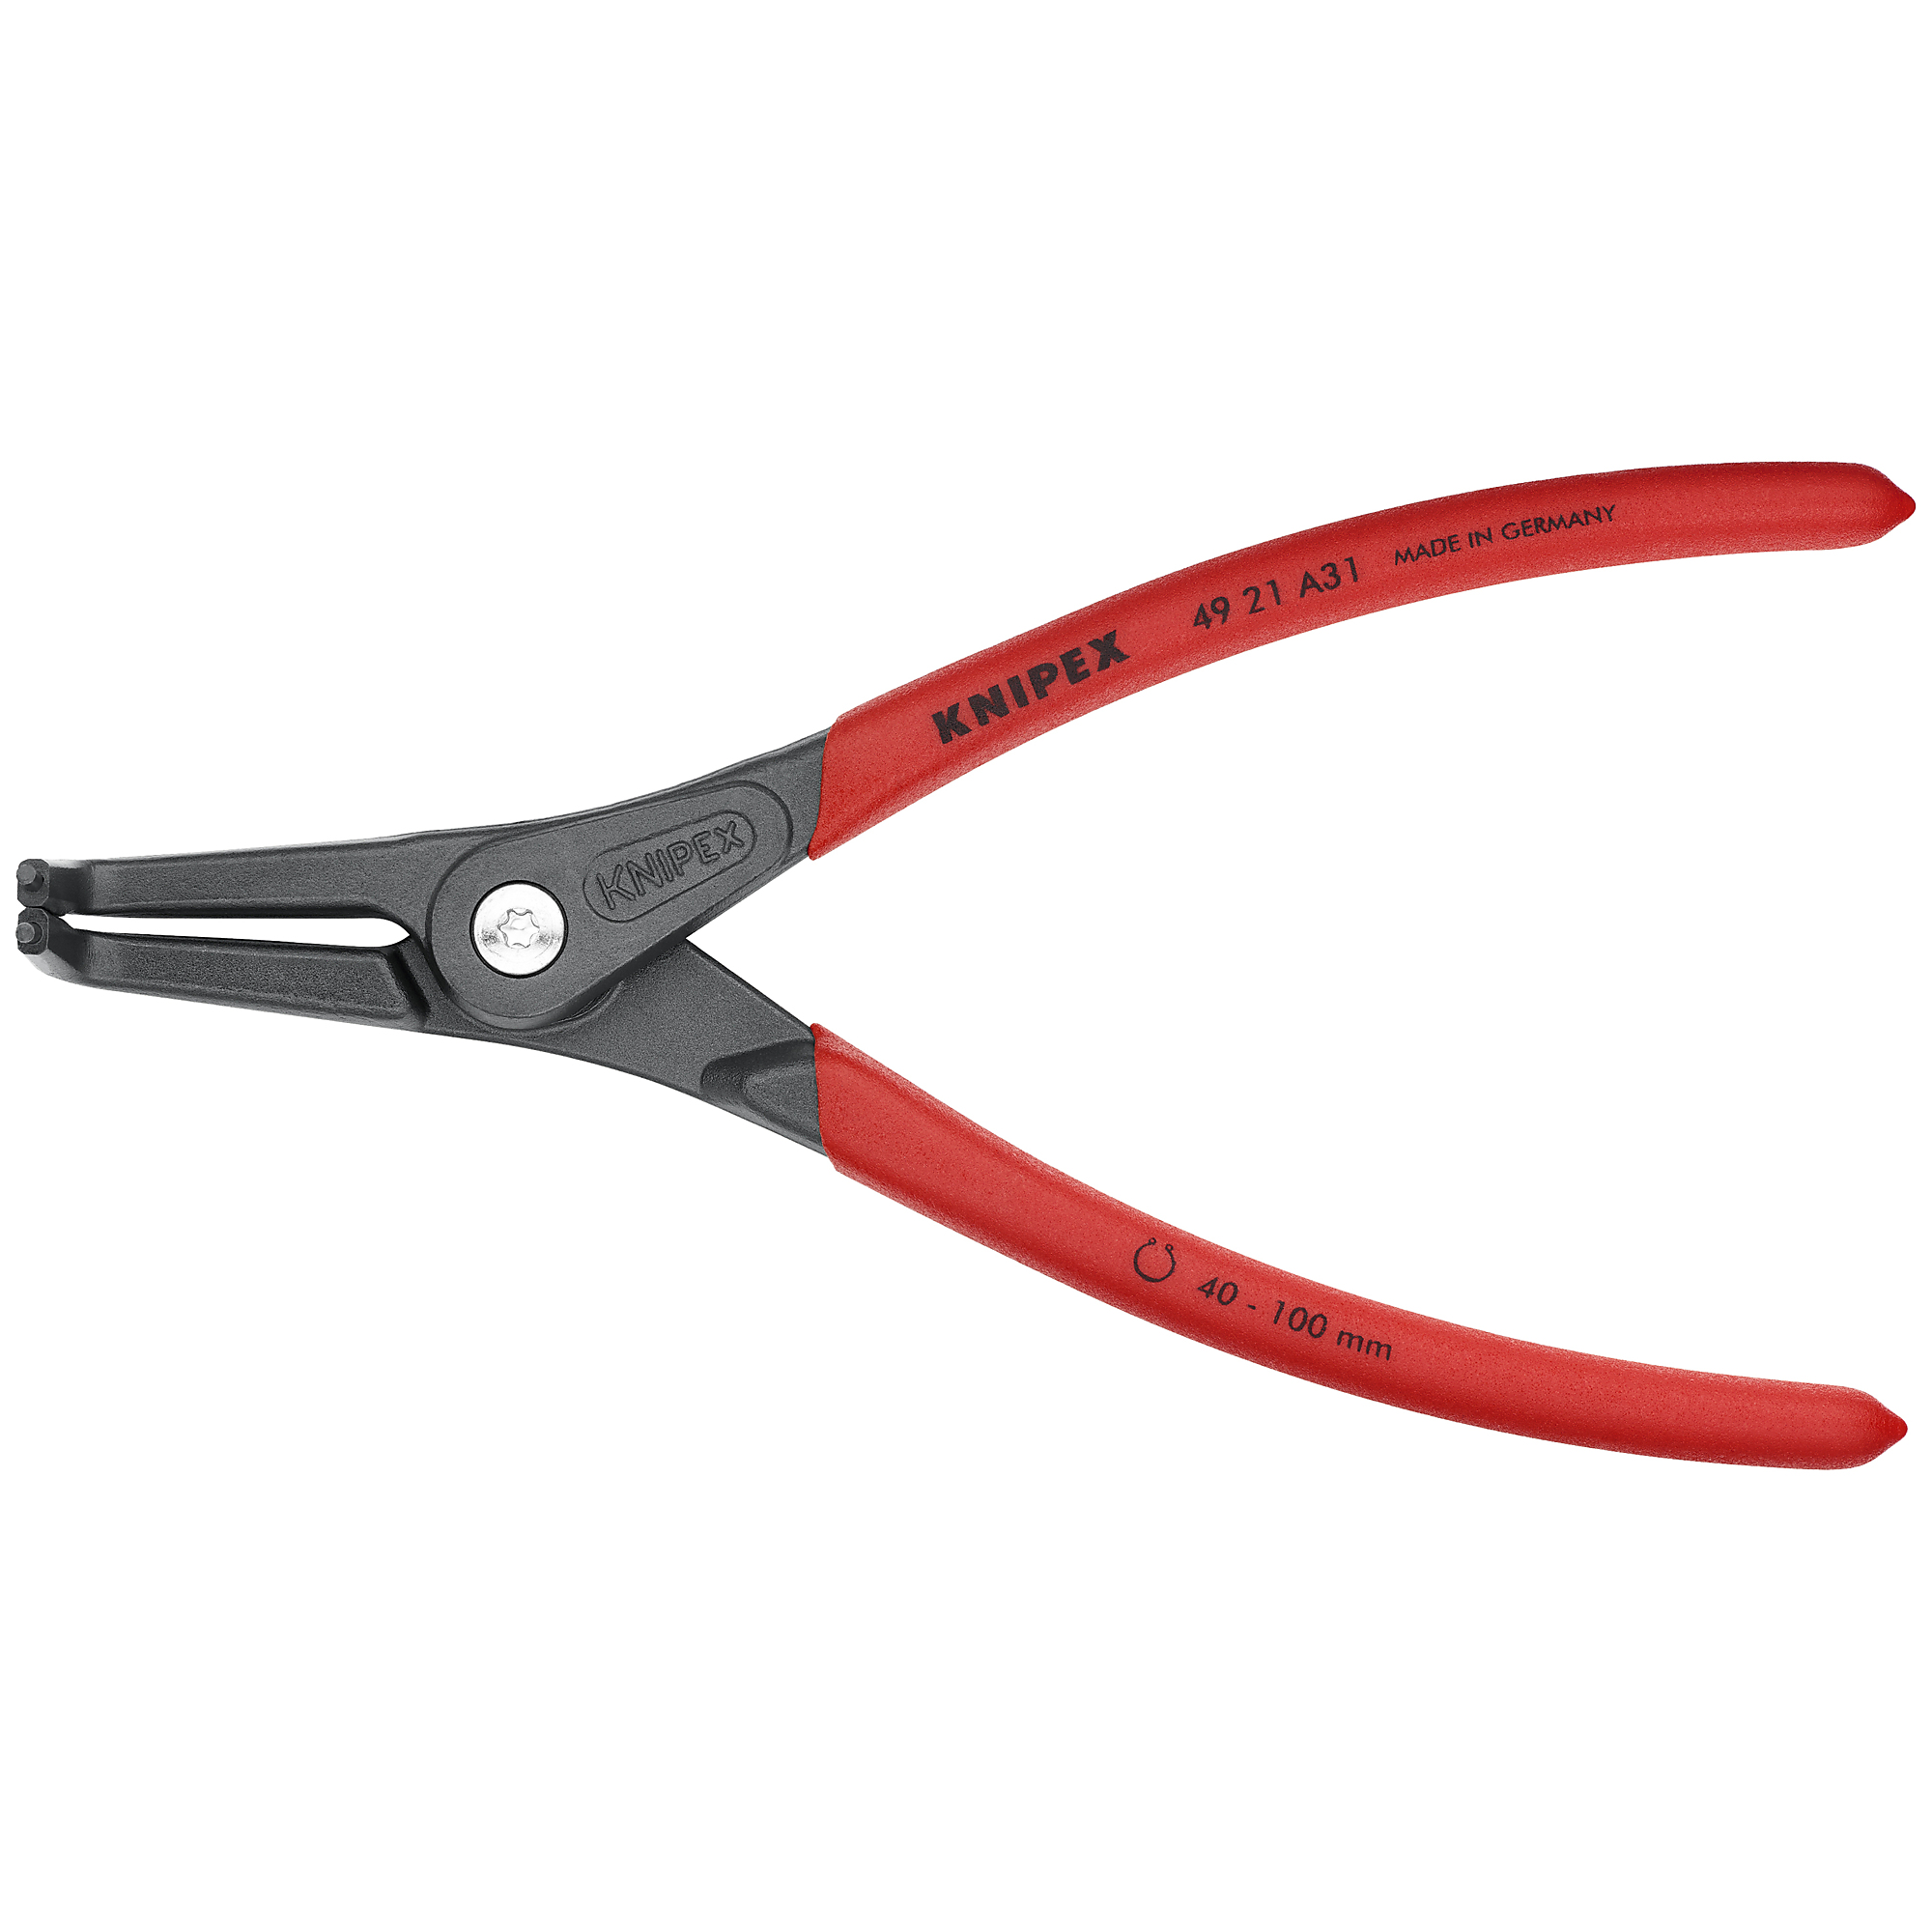 KNIPEX, Ext 90Â° Prec. Snap Ring Pliers, 3/32 tip, 8.25Inch, Pieces (qty.) 1 Material Steel, Model 49 21 A31